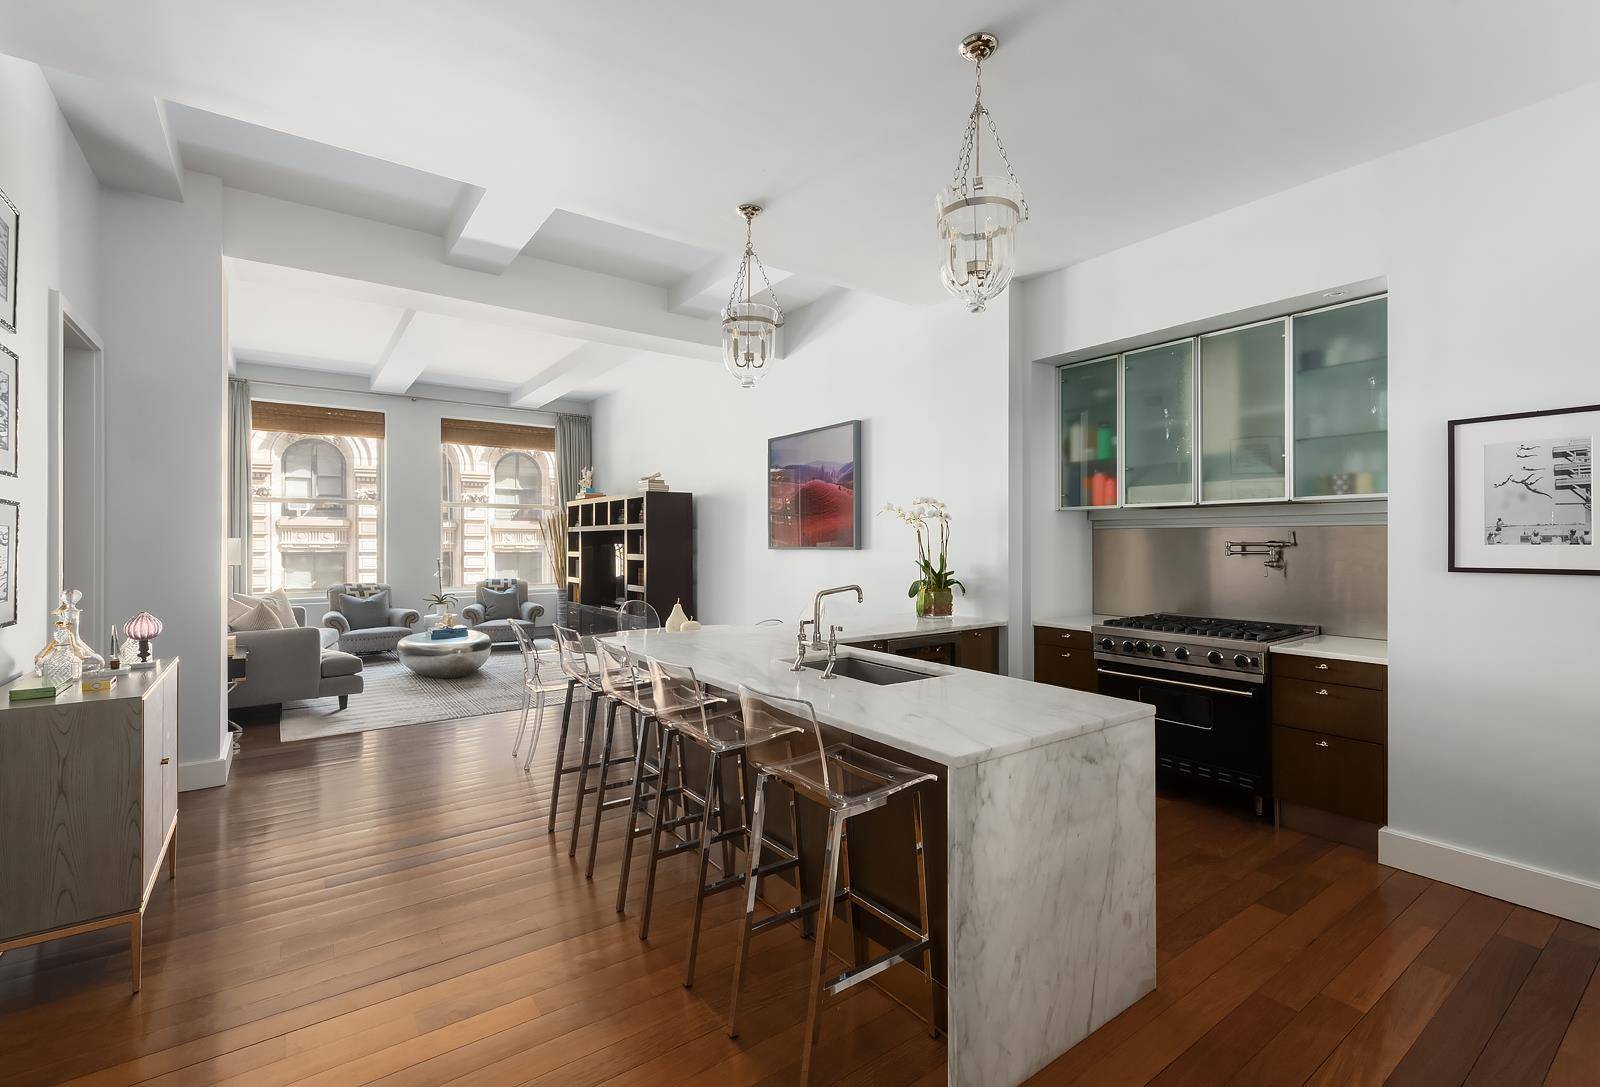 Situated in the heart of the prized Madison Square Park, this sprawling luxury loft offers timeless elegance, space, and the ultimate in location.